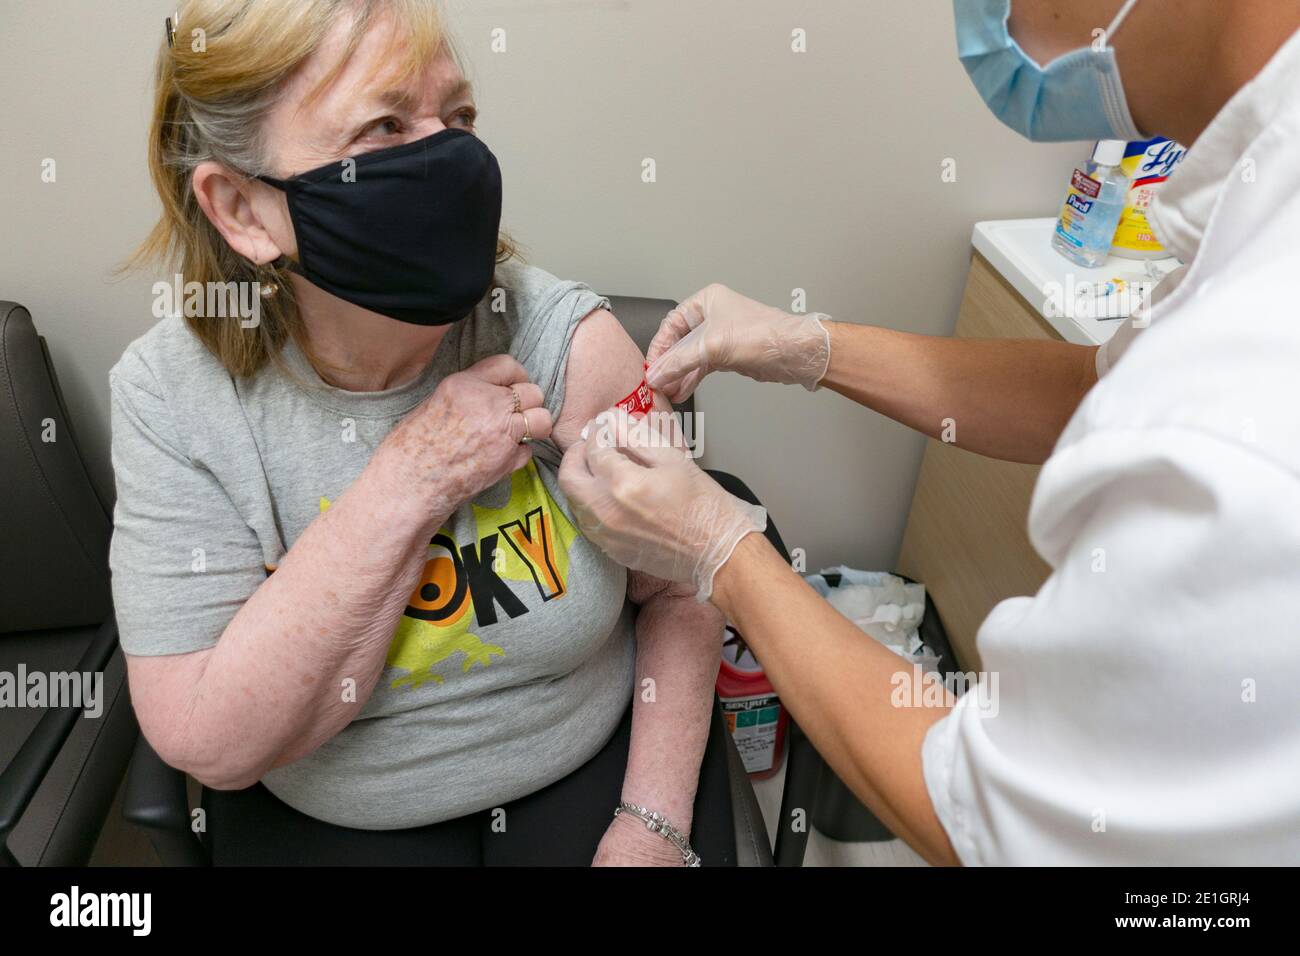 Woman getting a bandage after receiving her annual flu vaccine shot wearing masks during the Covid Pandemic. Minneapolis Minnesota MN USA Stock Photo